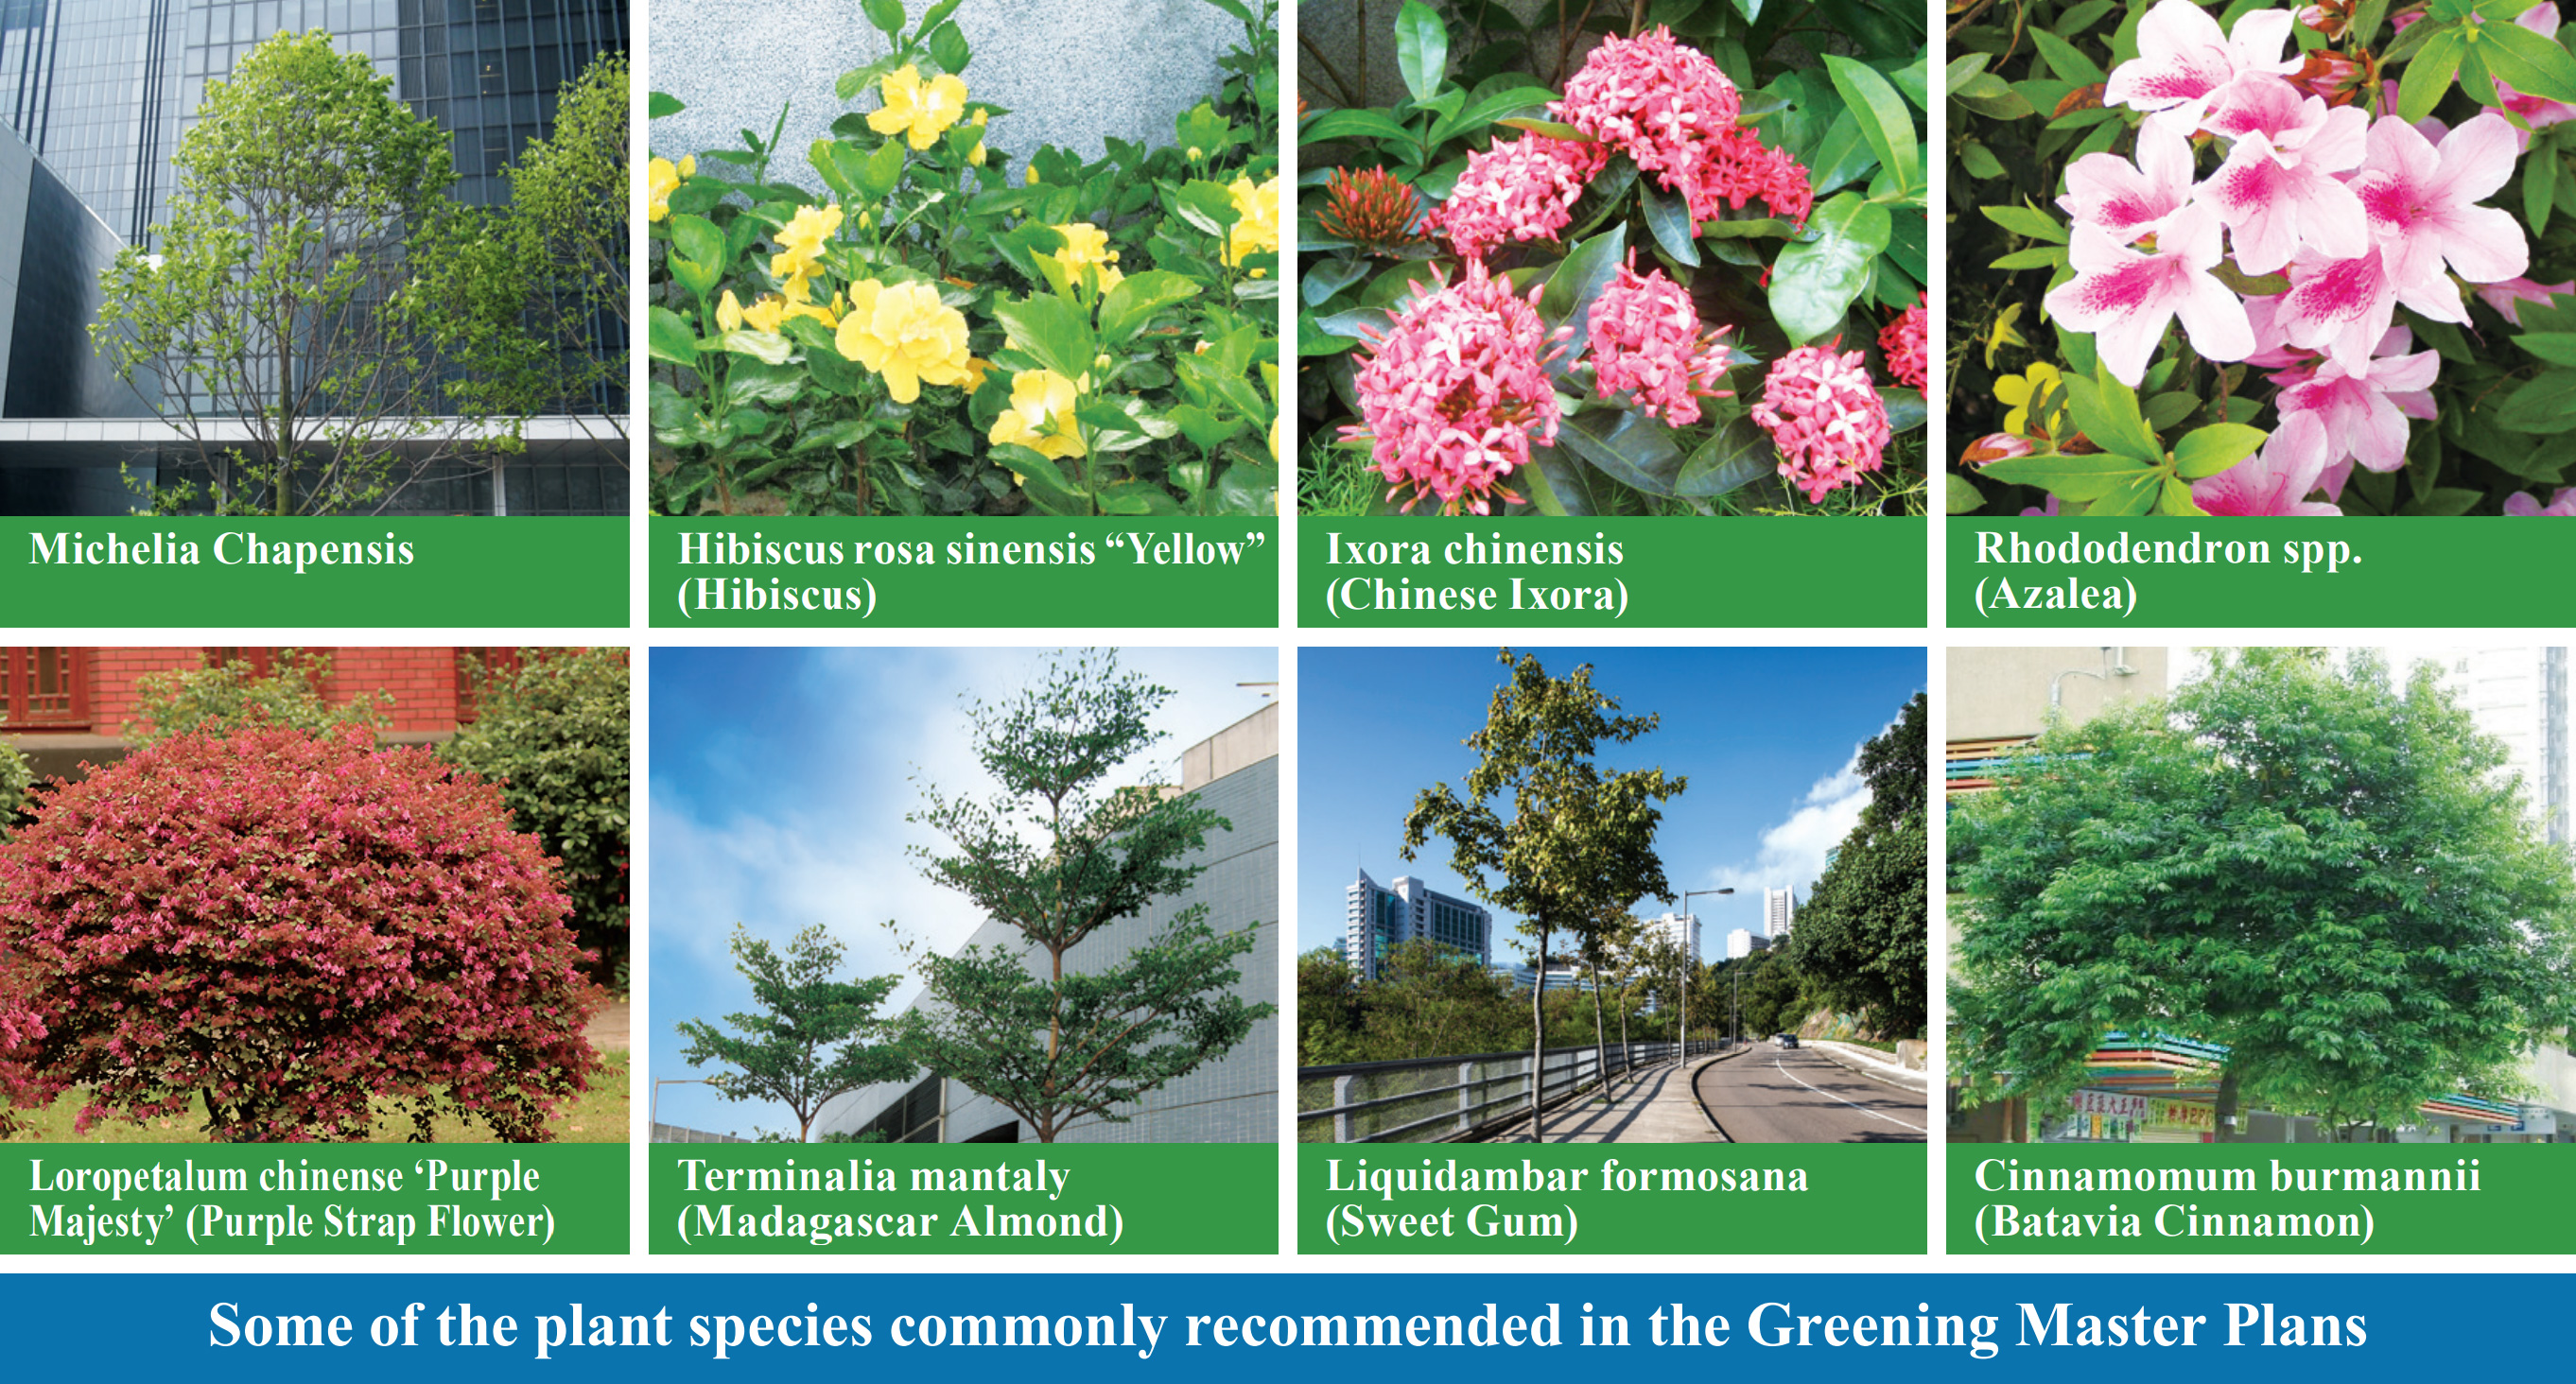 Some of the plant species commonly recommended in the Greening Master Plans